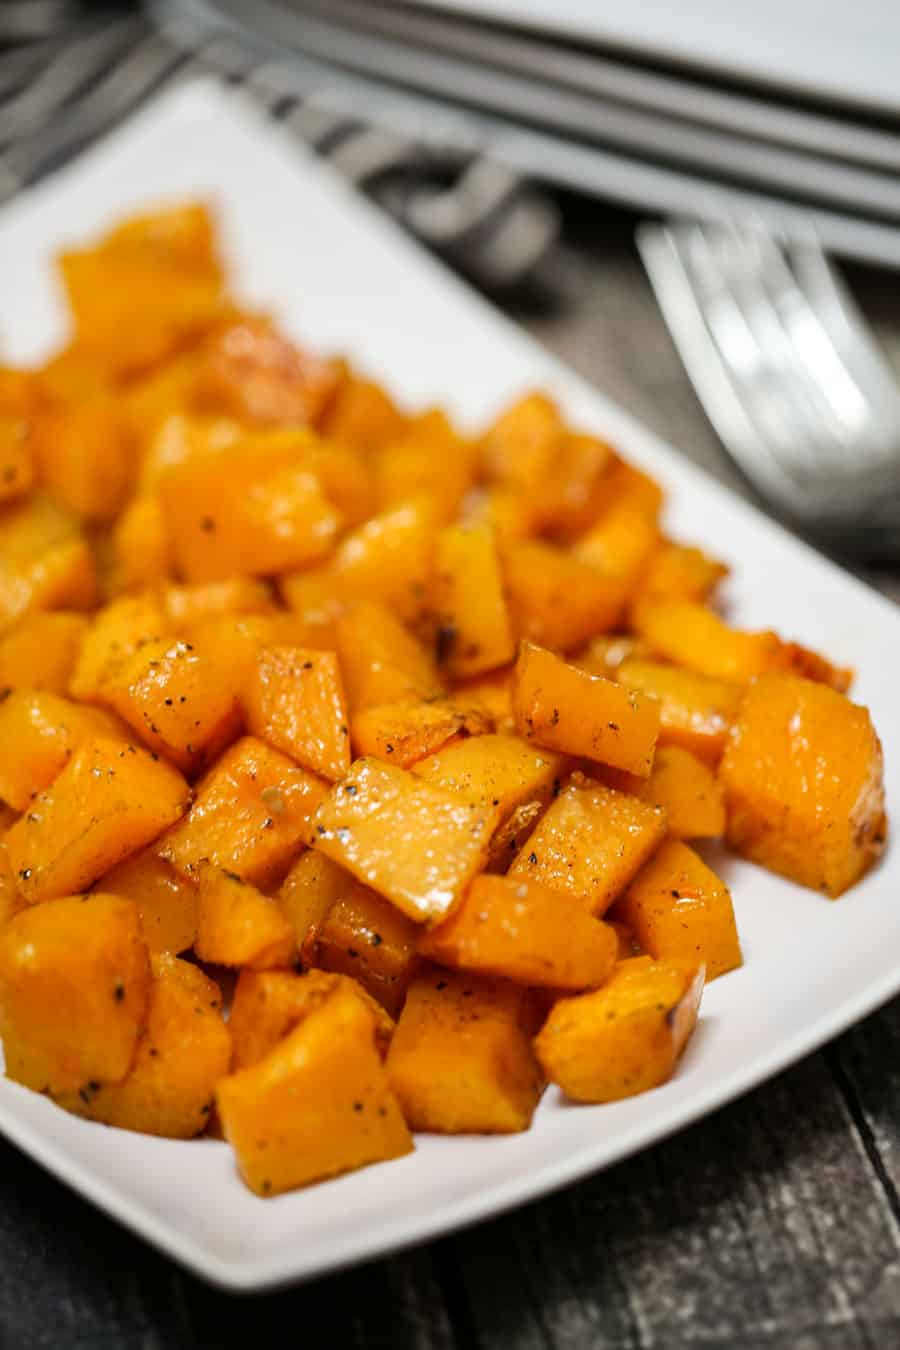 Vitamin packed Roasted Maple Cinnamon Butternut Squash is simple to bake - simply spread butternut squash chunk cubes on a baking sheet which were tossed in olive oil, maple syrup, cinnamon, salt and pepper. The result is a sweet caramelized roasted root vegetable that is a delicious side dish. 